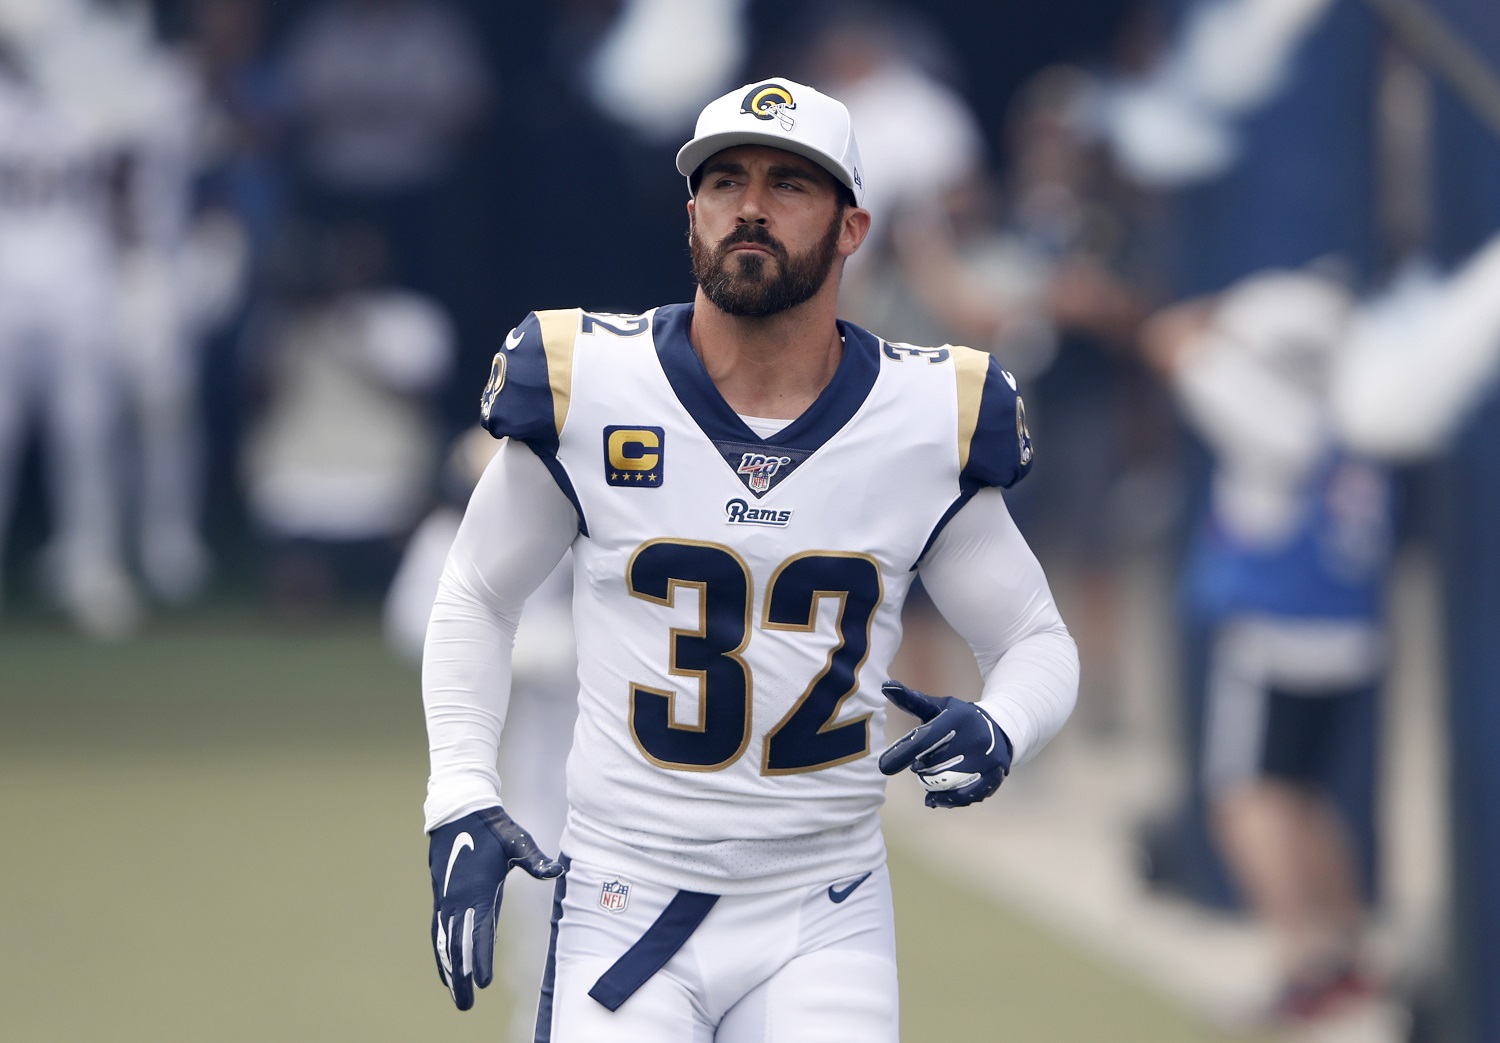 Eric Weddle of the Los Angeles Rams enters the stadium prior to a game against the New Orleans Saints at Los Angeles Memorial Coliseum on Sept. 15, 2019. | Sean M. Haffey/Getty Images